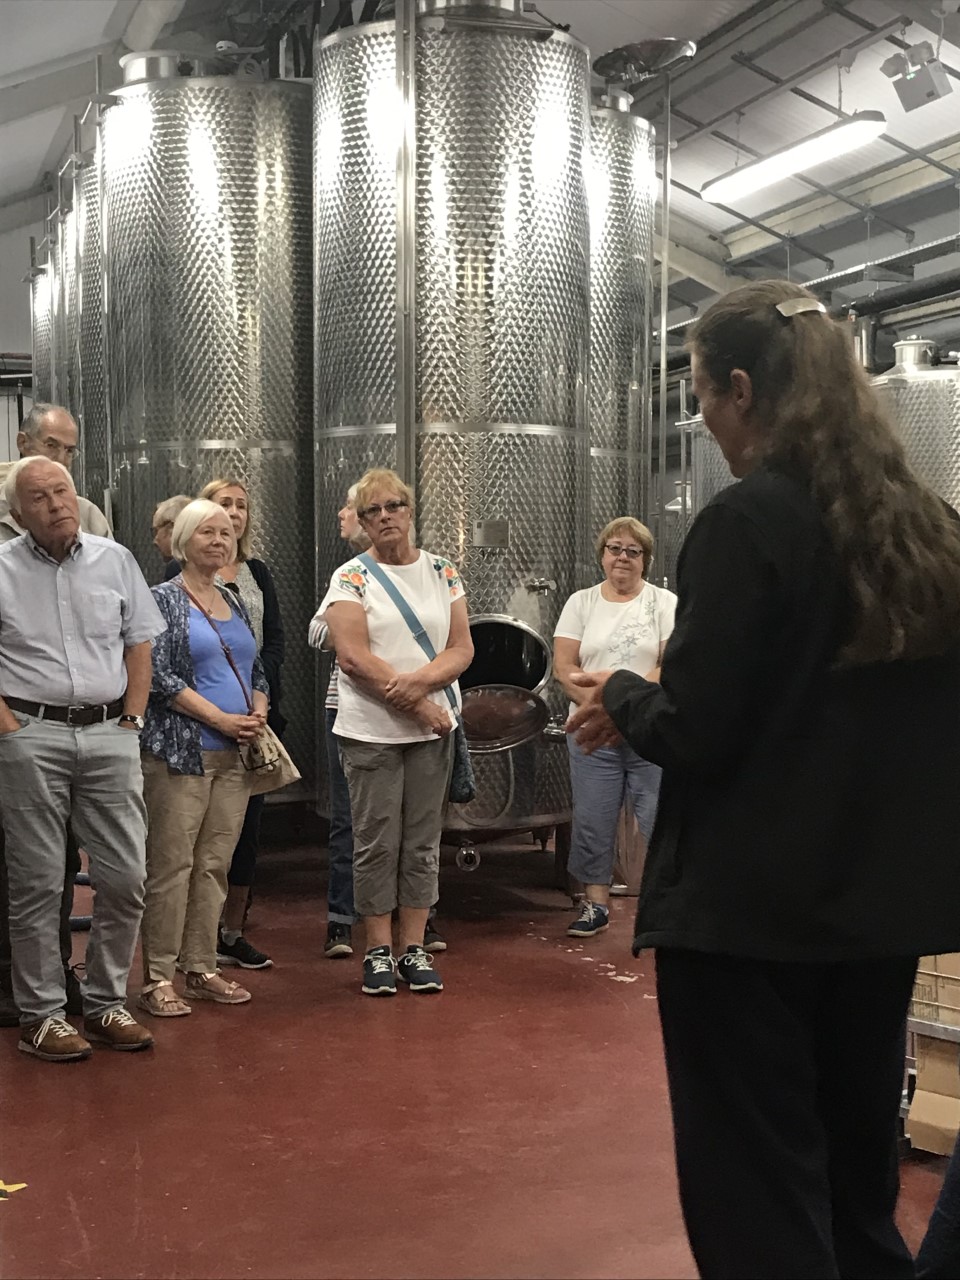 Visit to Woodchester Valley Vineyard